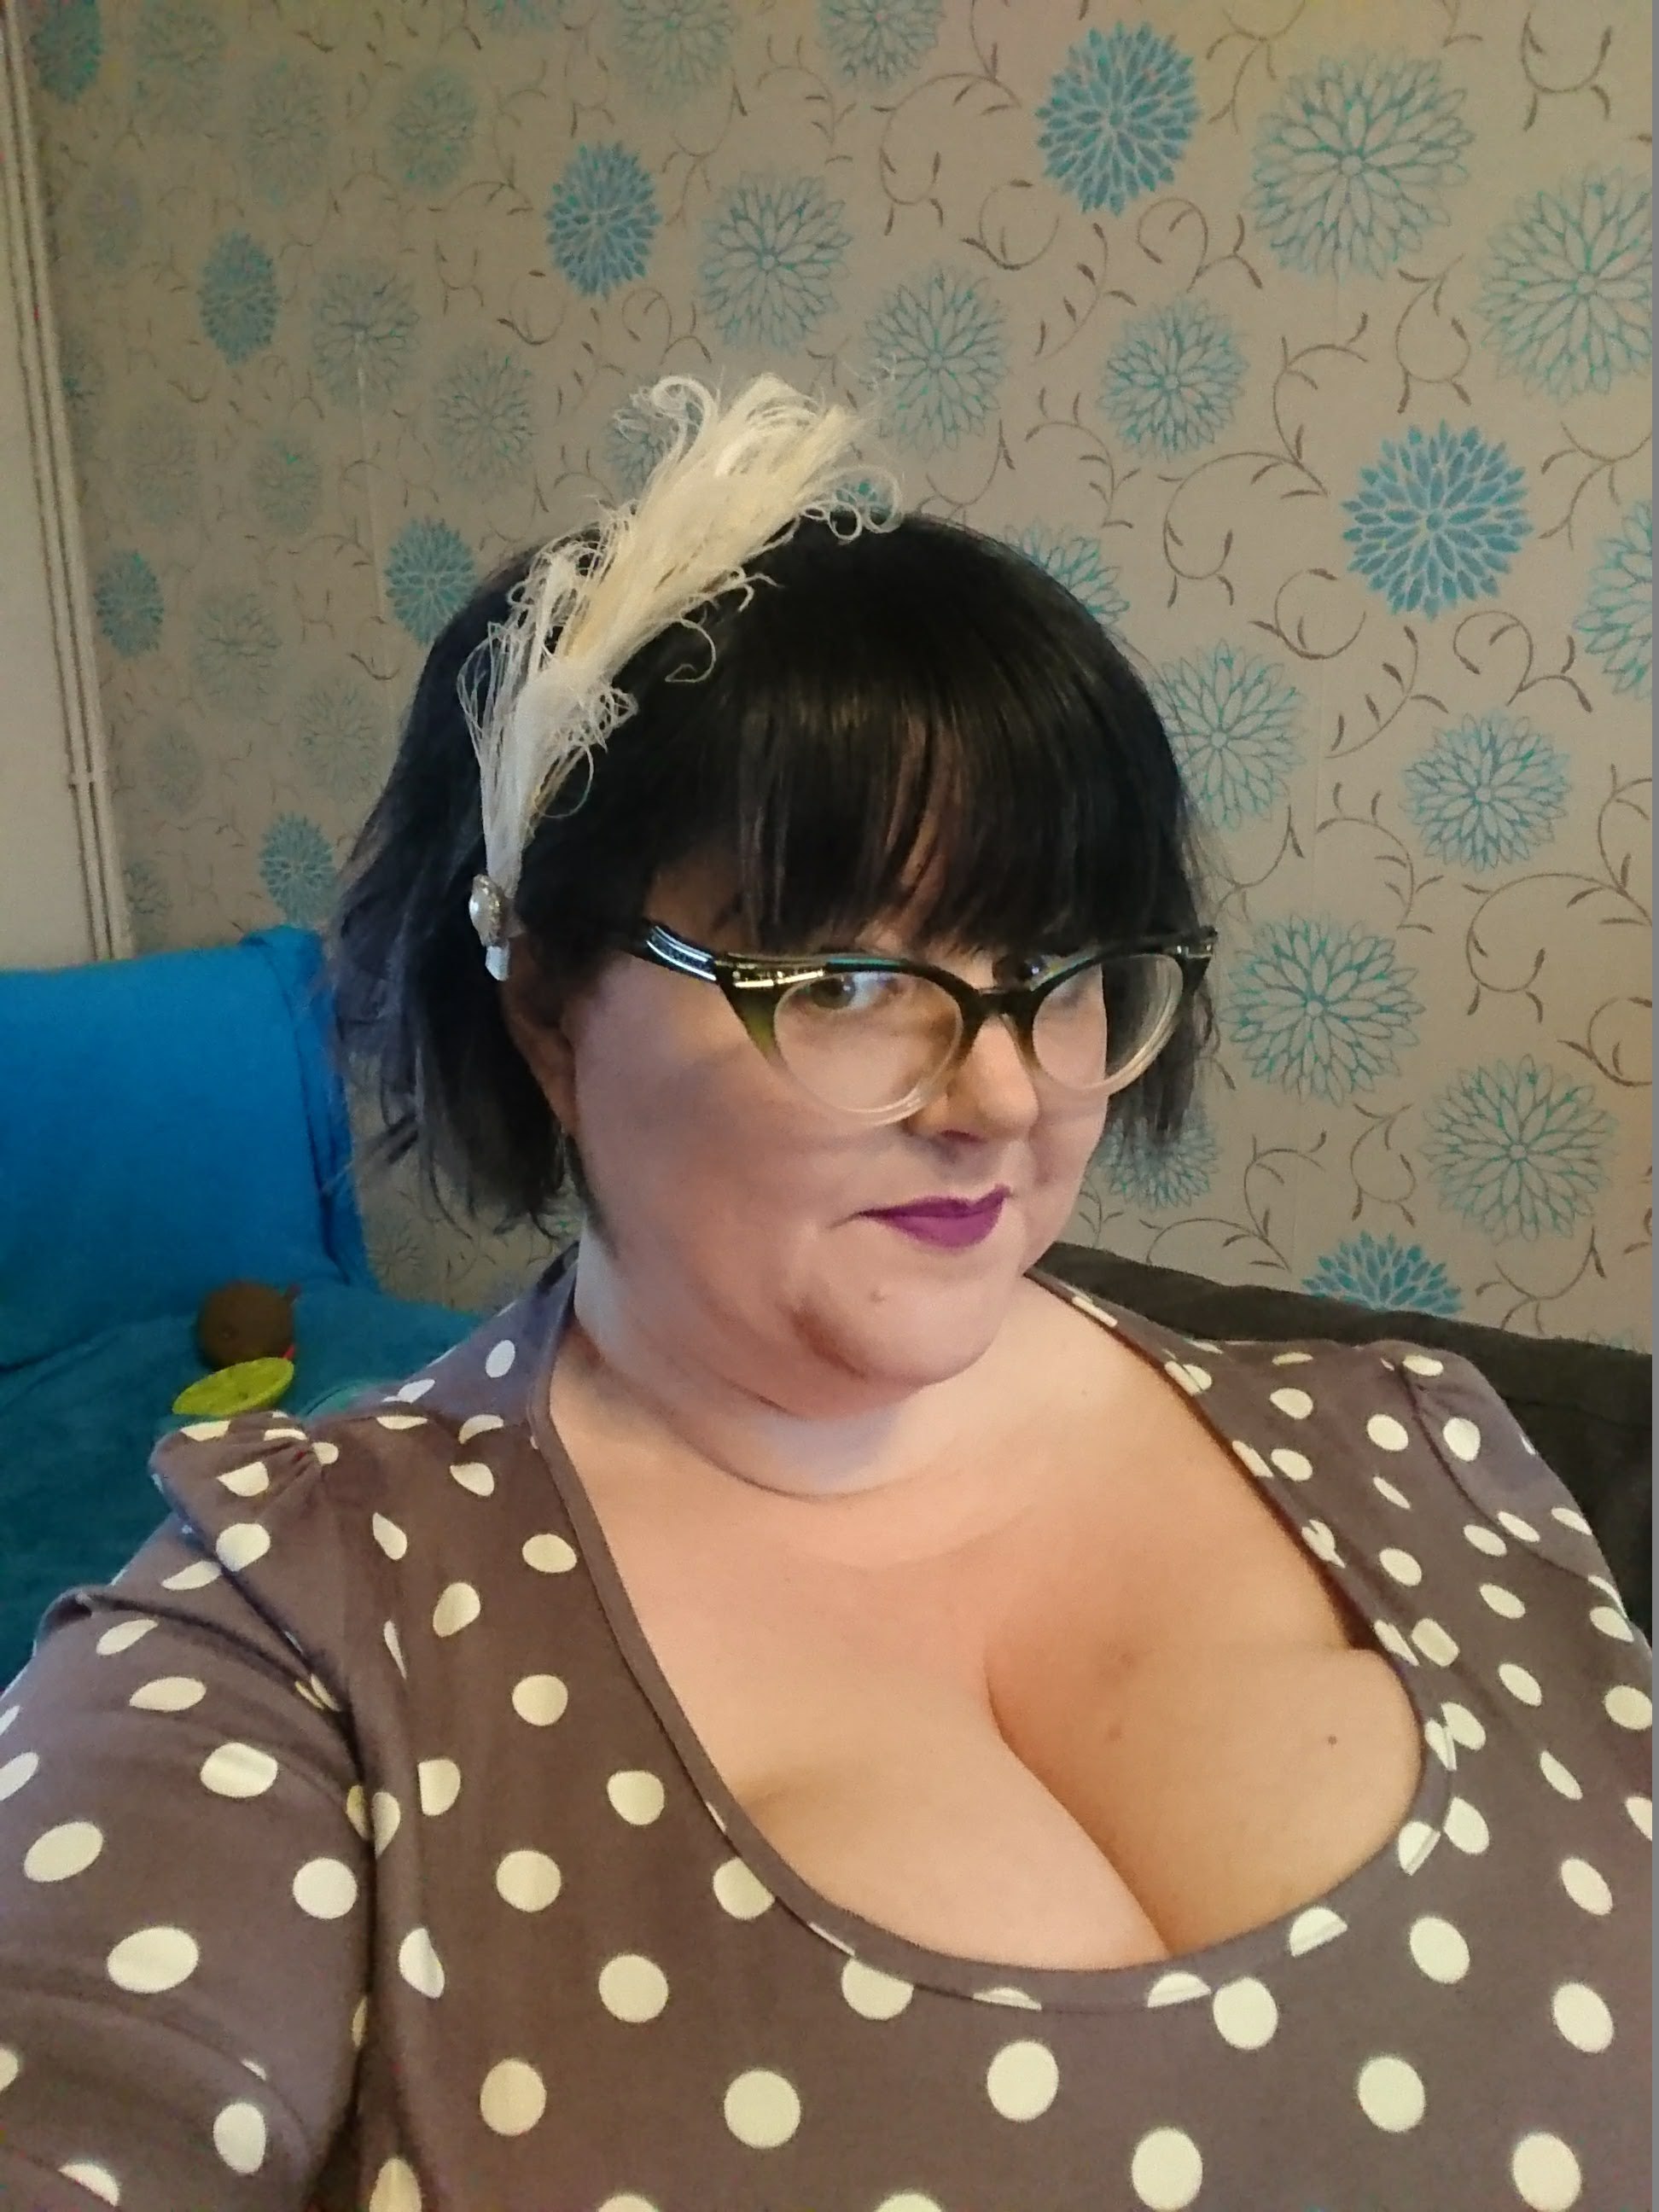 amie wiser recommends mature bbw cleavage pic